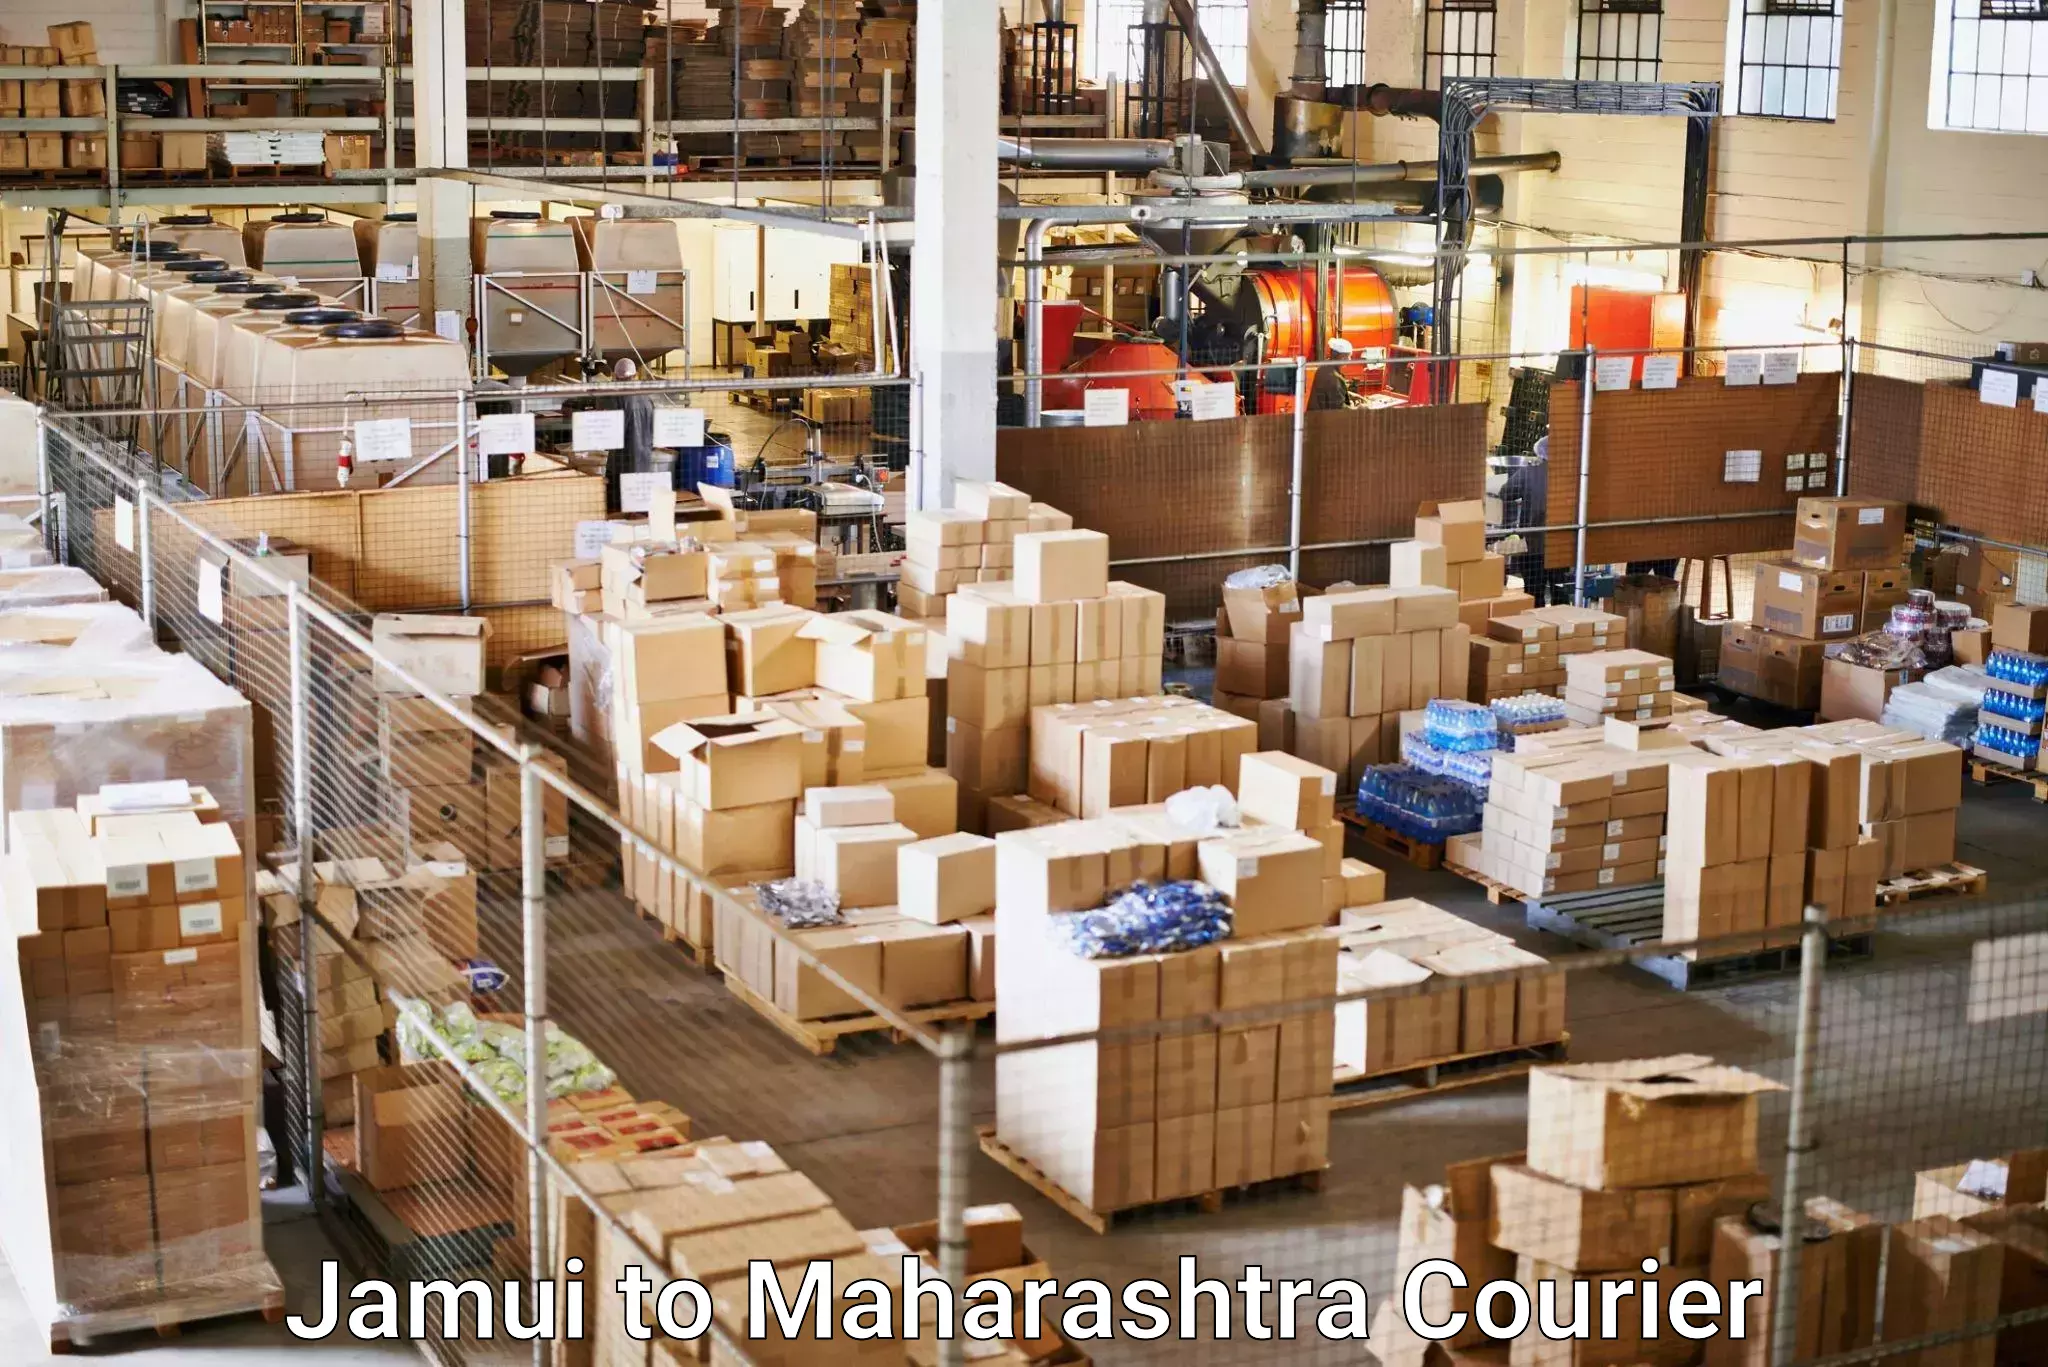 High-speed parcel service Jamui to Thane